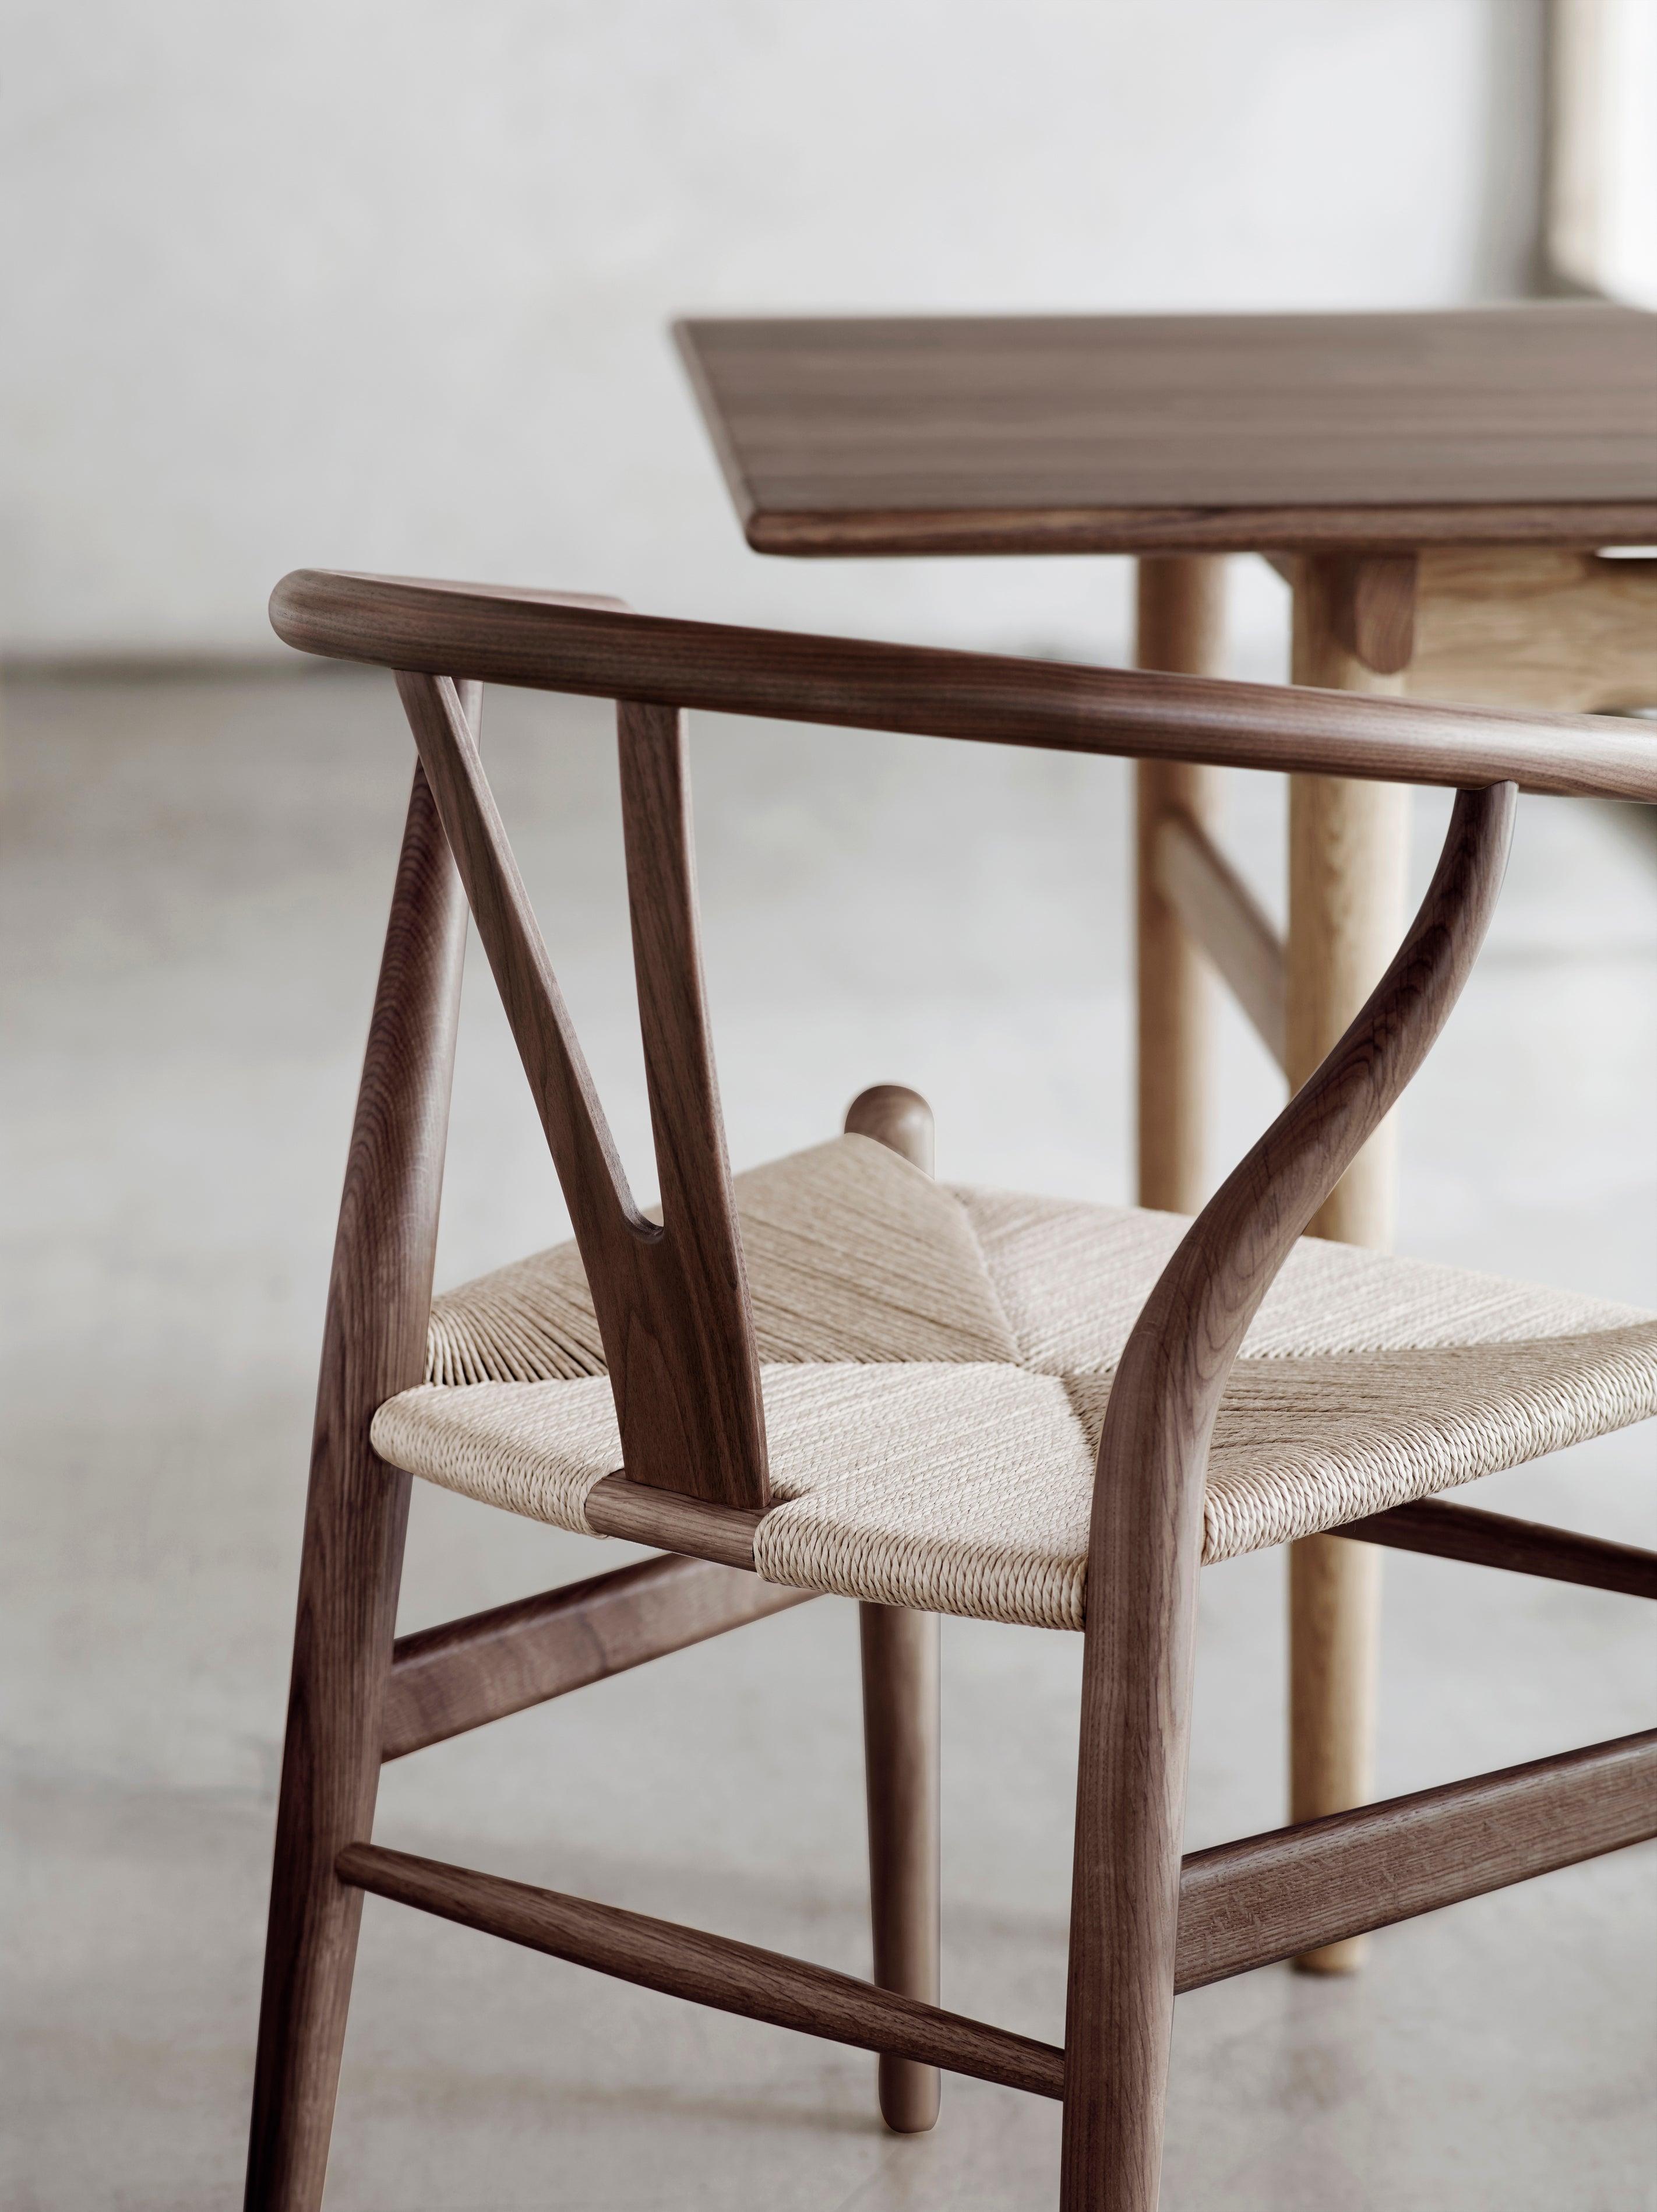 Modern CH24 Wishbone Chair in Oak Smoked Stain & Natural Papercord Seat by Hans Wegner